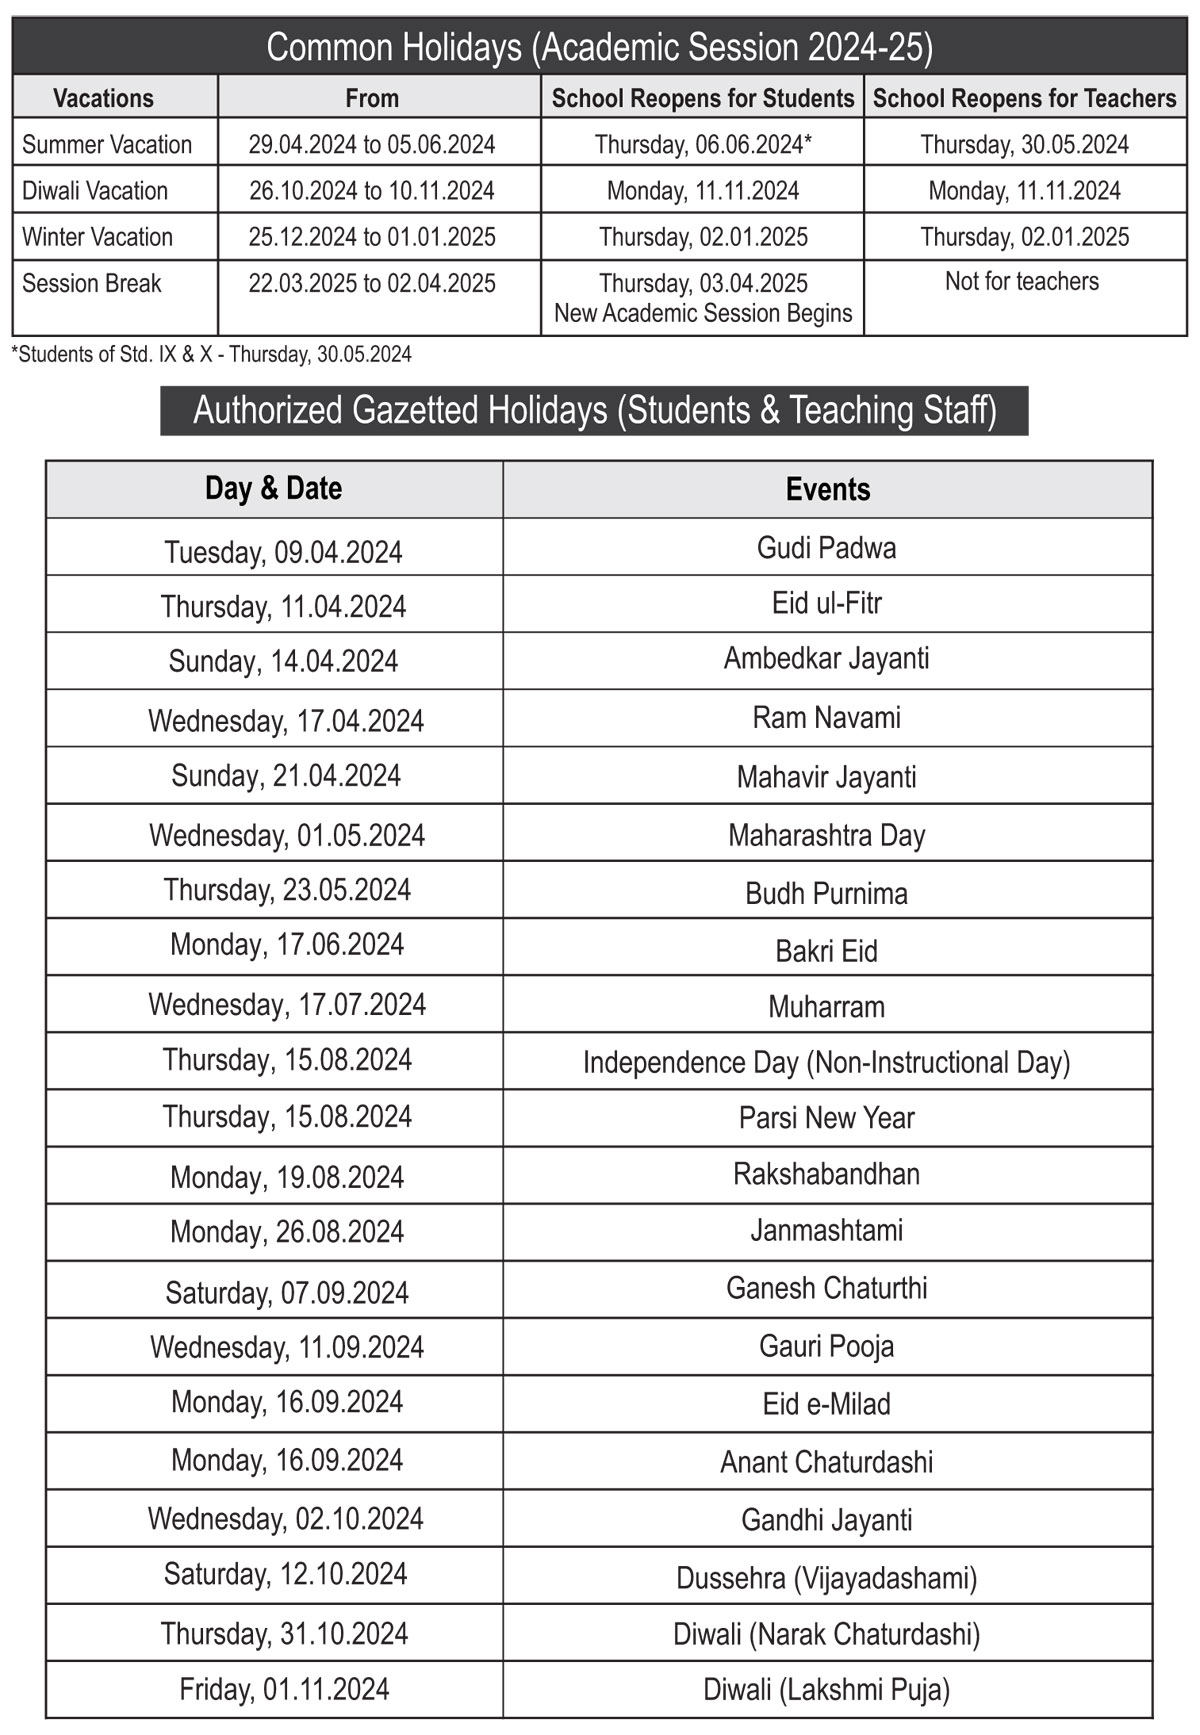 General Motors Holiday Calendar 2022 Yearly Holidays And Vacations Time Table | Podar Education Network